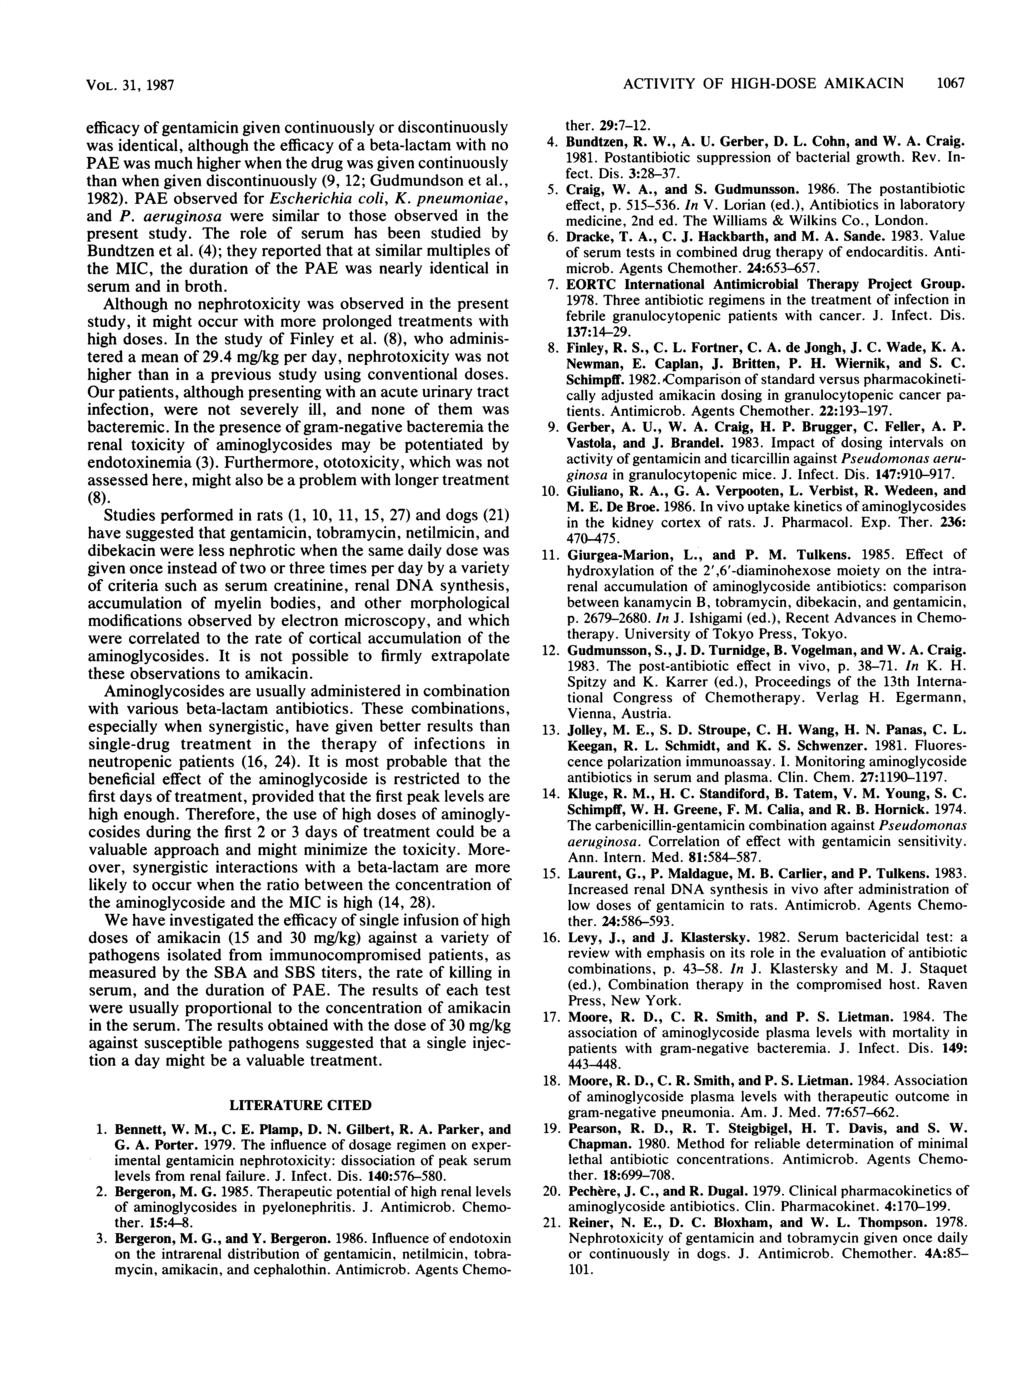 VOL. 31, 1987 efficacy of gentamicin given continuously or discontinuously was identical, although the efficacy of a beta-lactam with no PAE was much higher when the drug was given continuously than